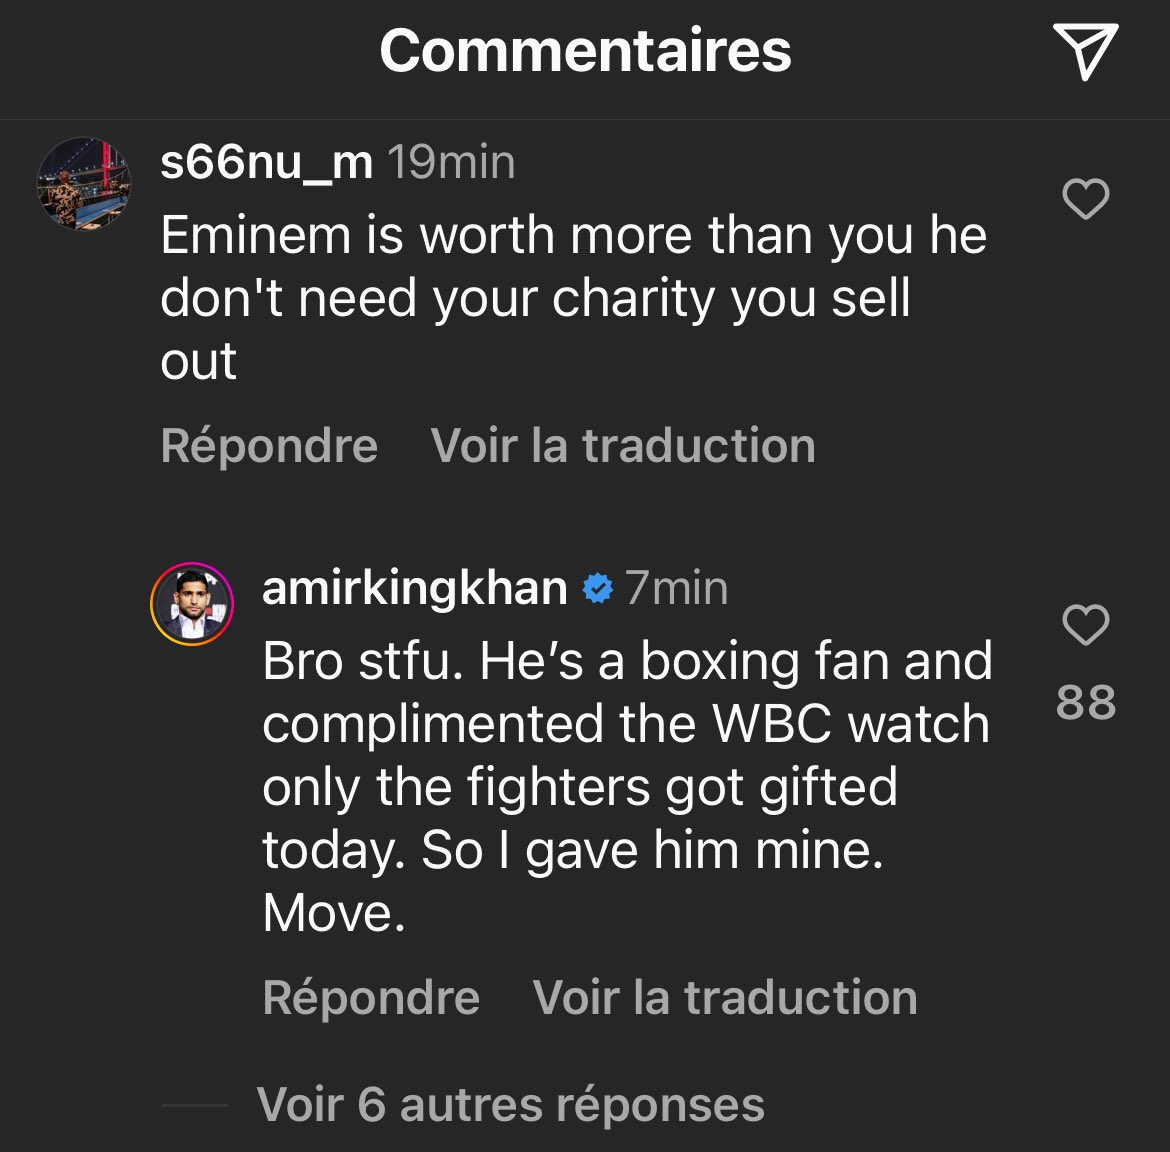 Responding to a crazed fan message, Amir Kahn wrote that he was happy to bestow the rap legend with his watch, as he knows he is an avid boxing fan